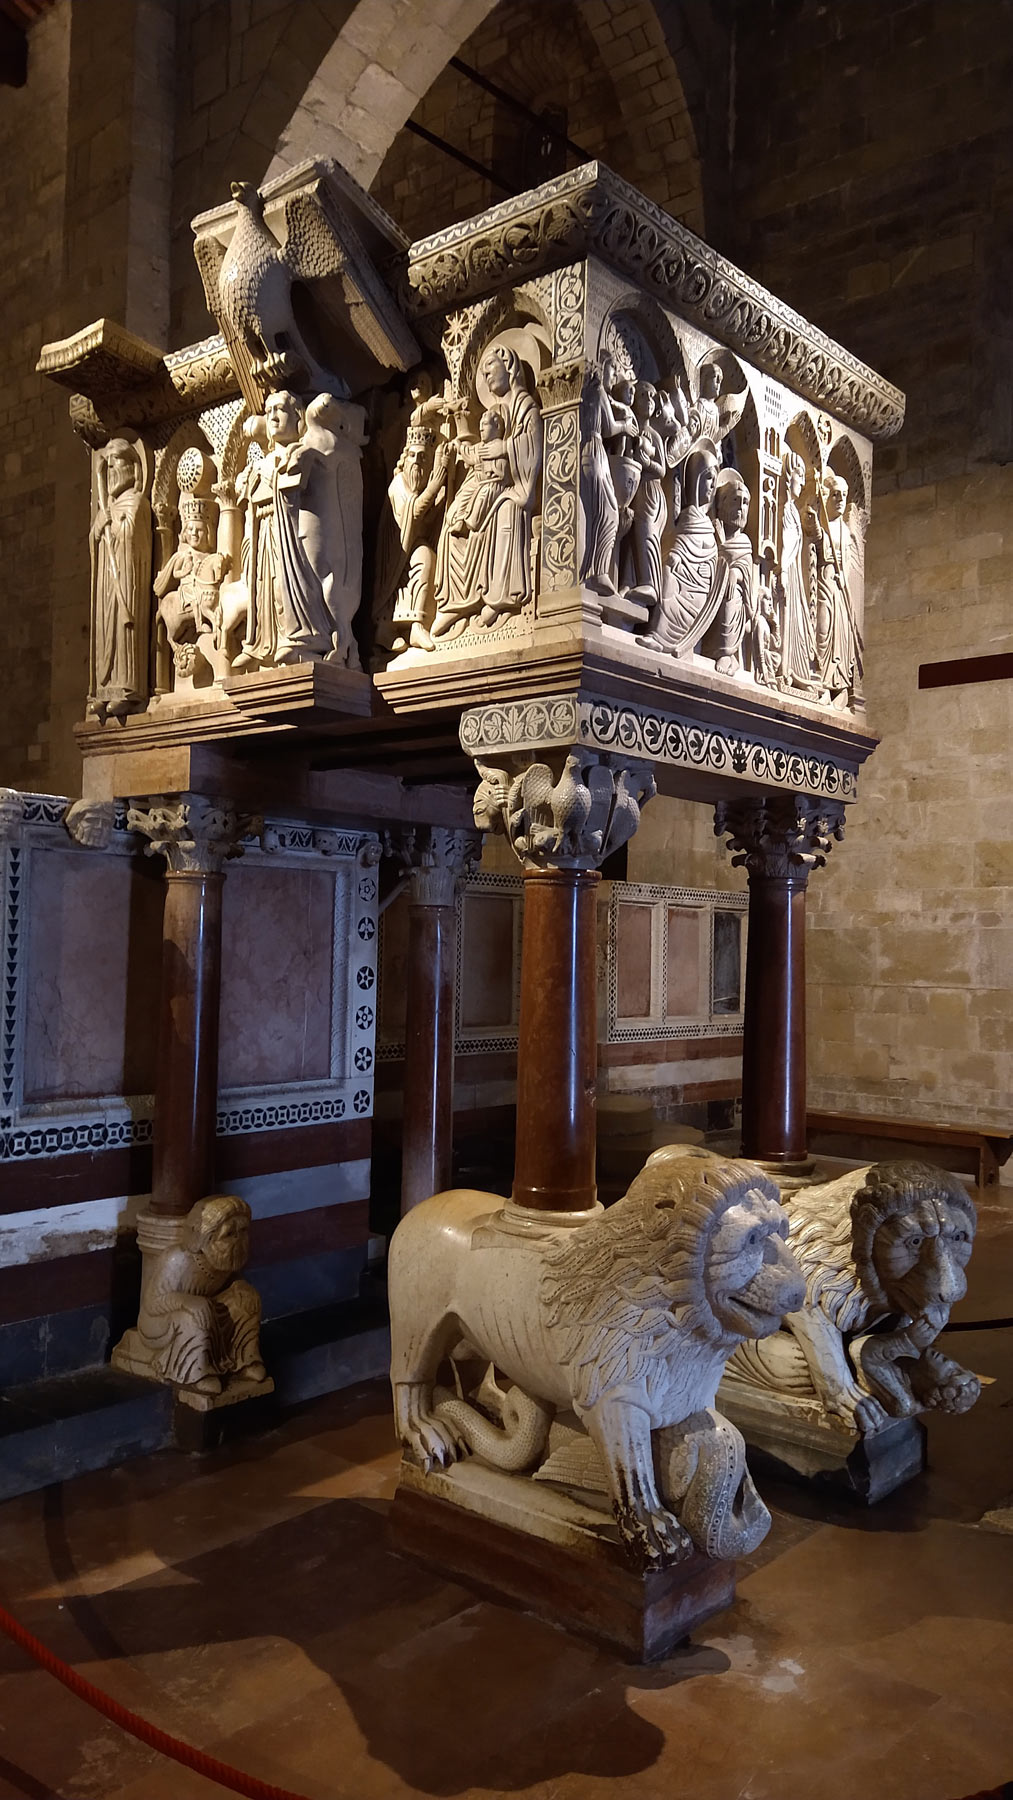 The pulpit of the cathedral. Ph. Credit Finestre Sull'Arte